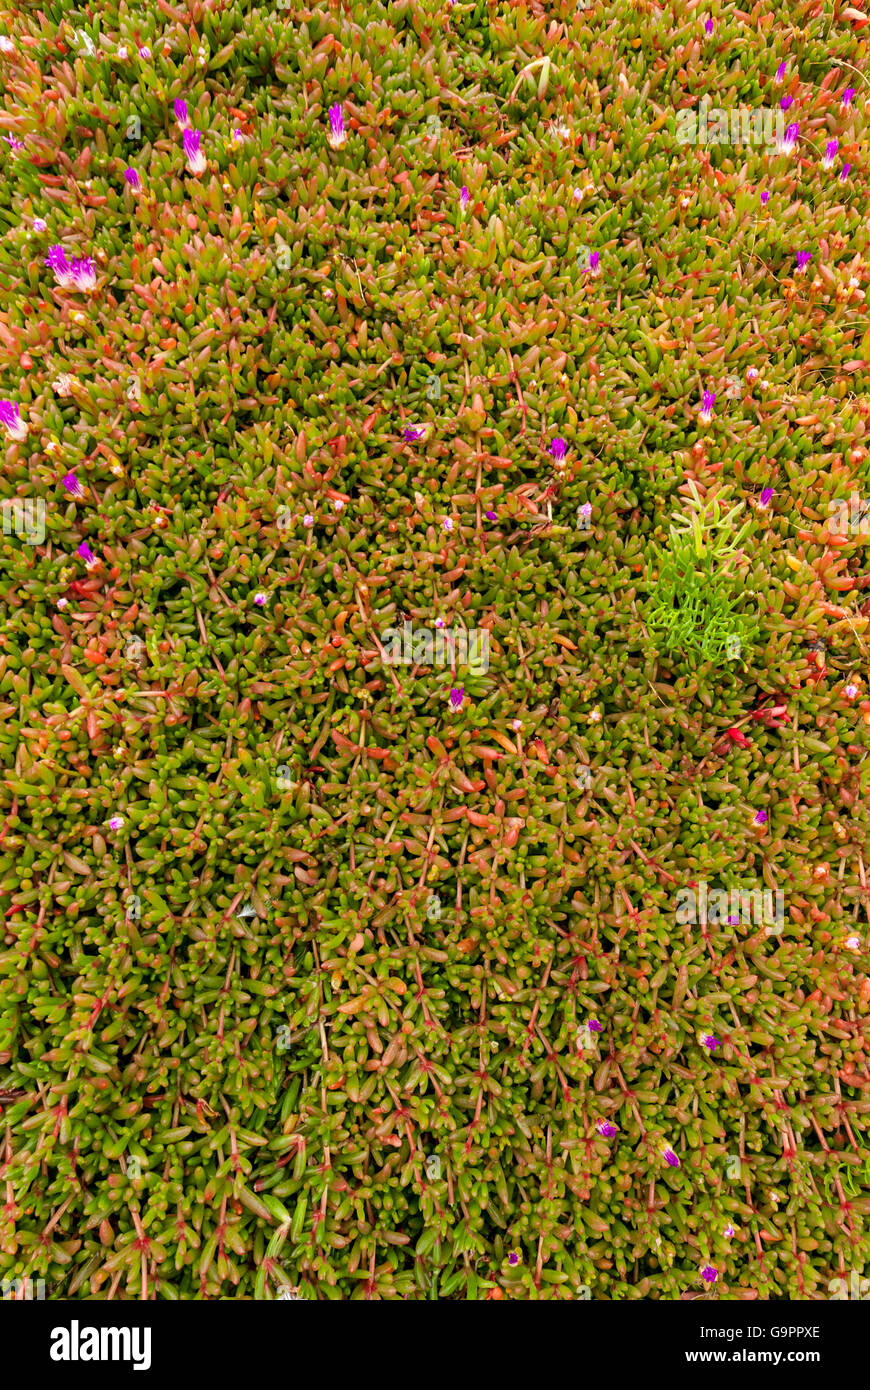 Ground totally covered with a texture of small red and green succulent plants (carpobrotus spp) with some pink flowers Stock Photo